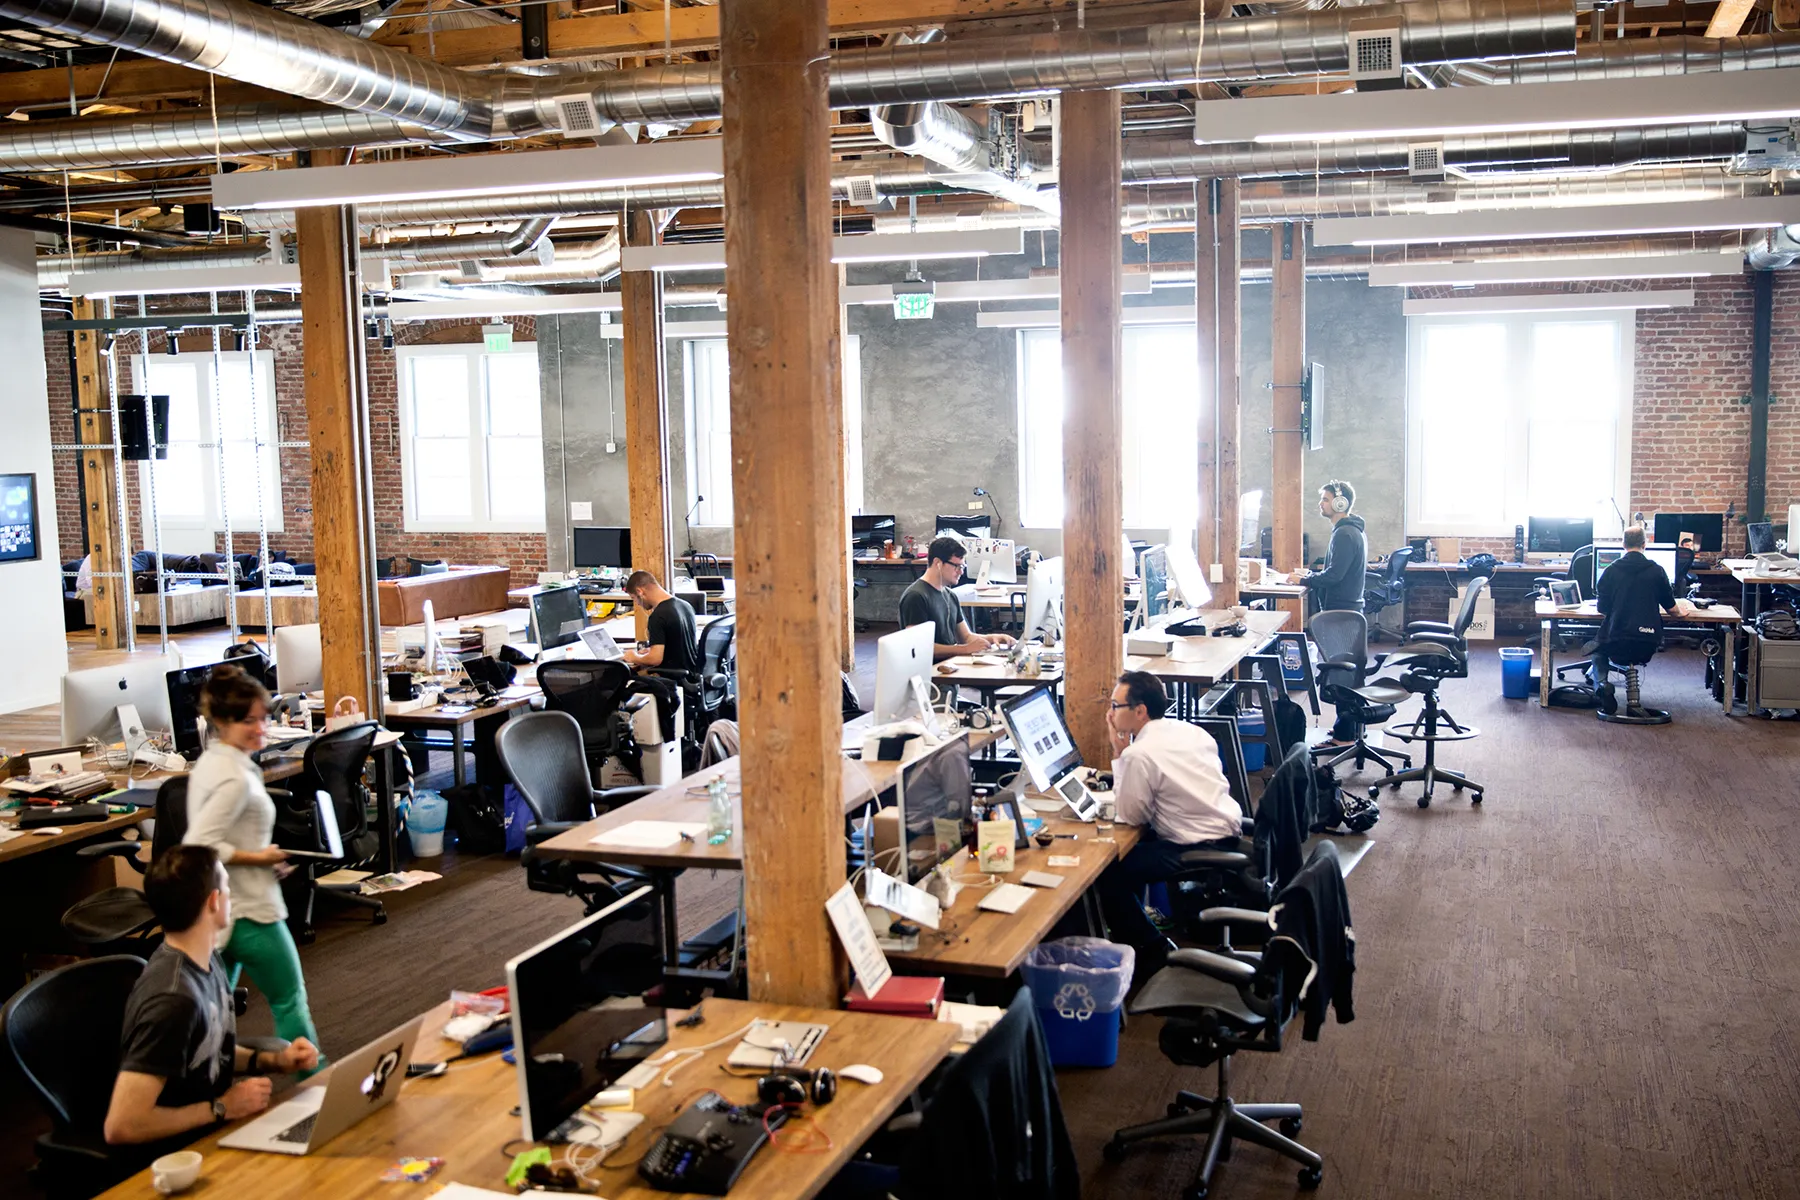 Github offices | ARIEL ZAMBELICH/WIRED